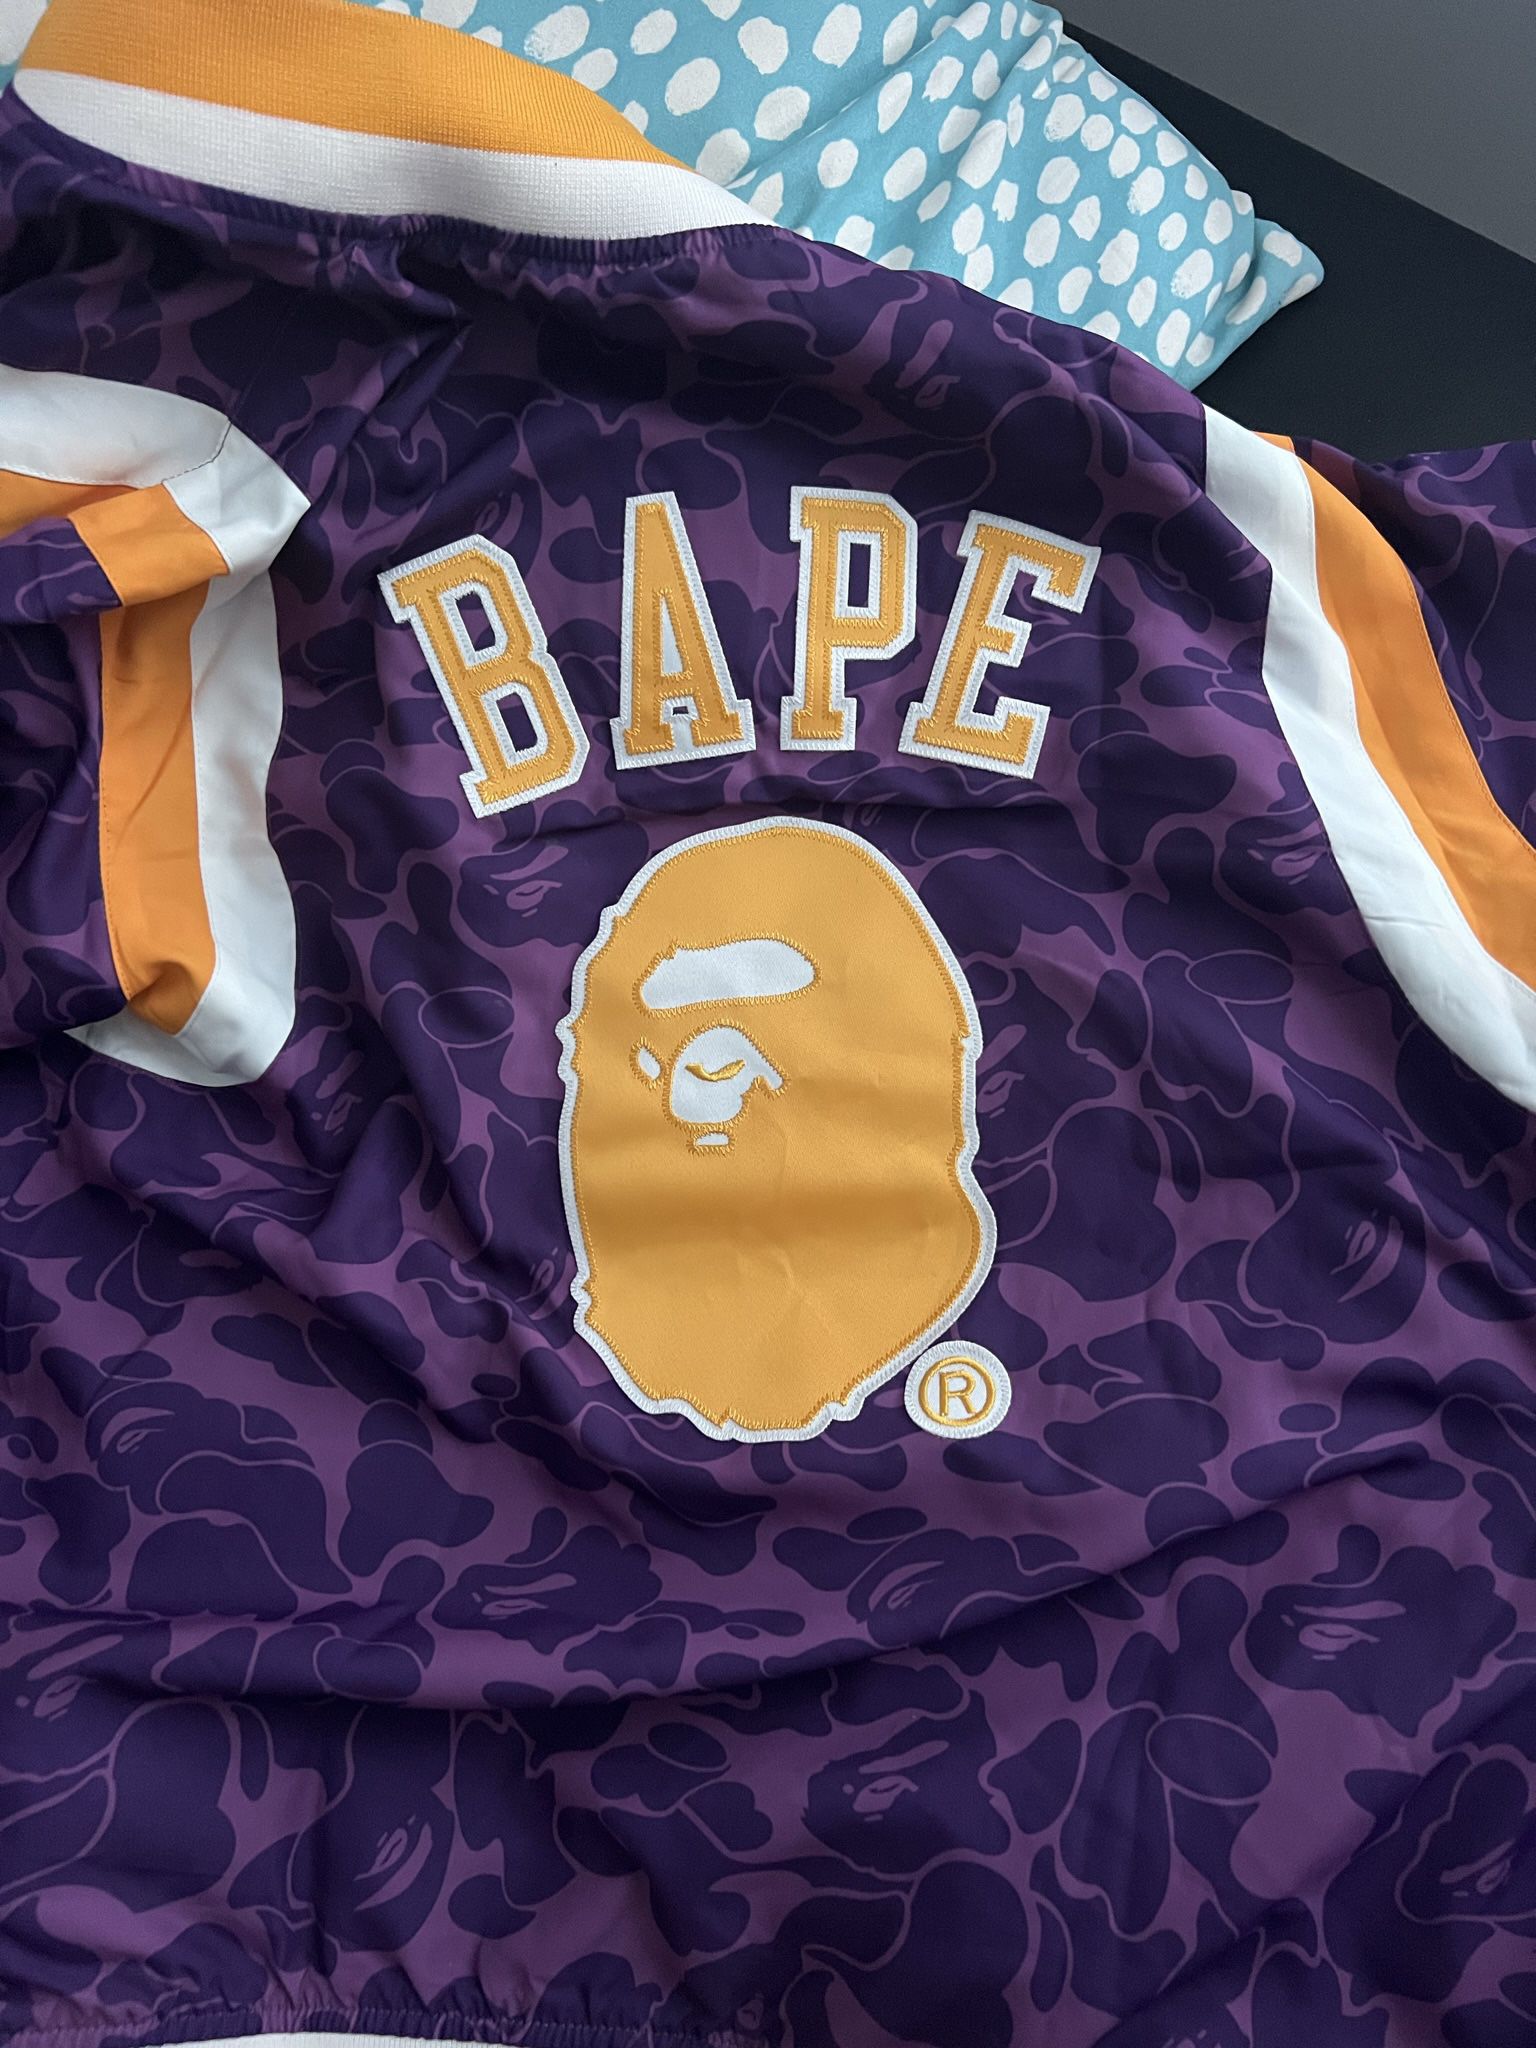 Bape Lakers Jacket Size Medium for Sale in Largo, MD - OfferUp